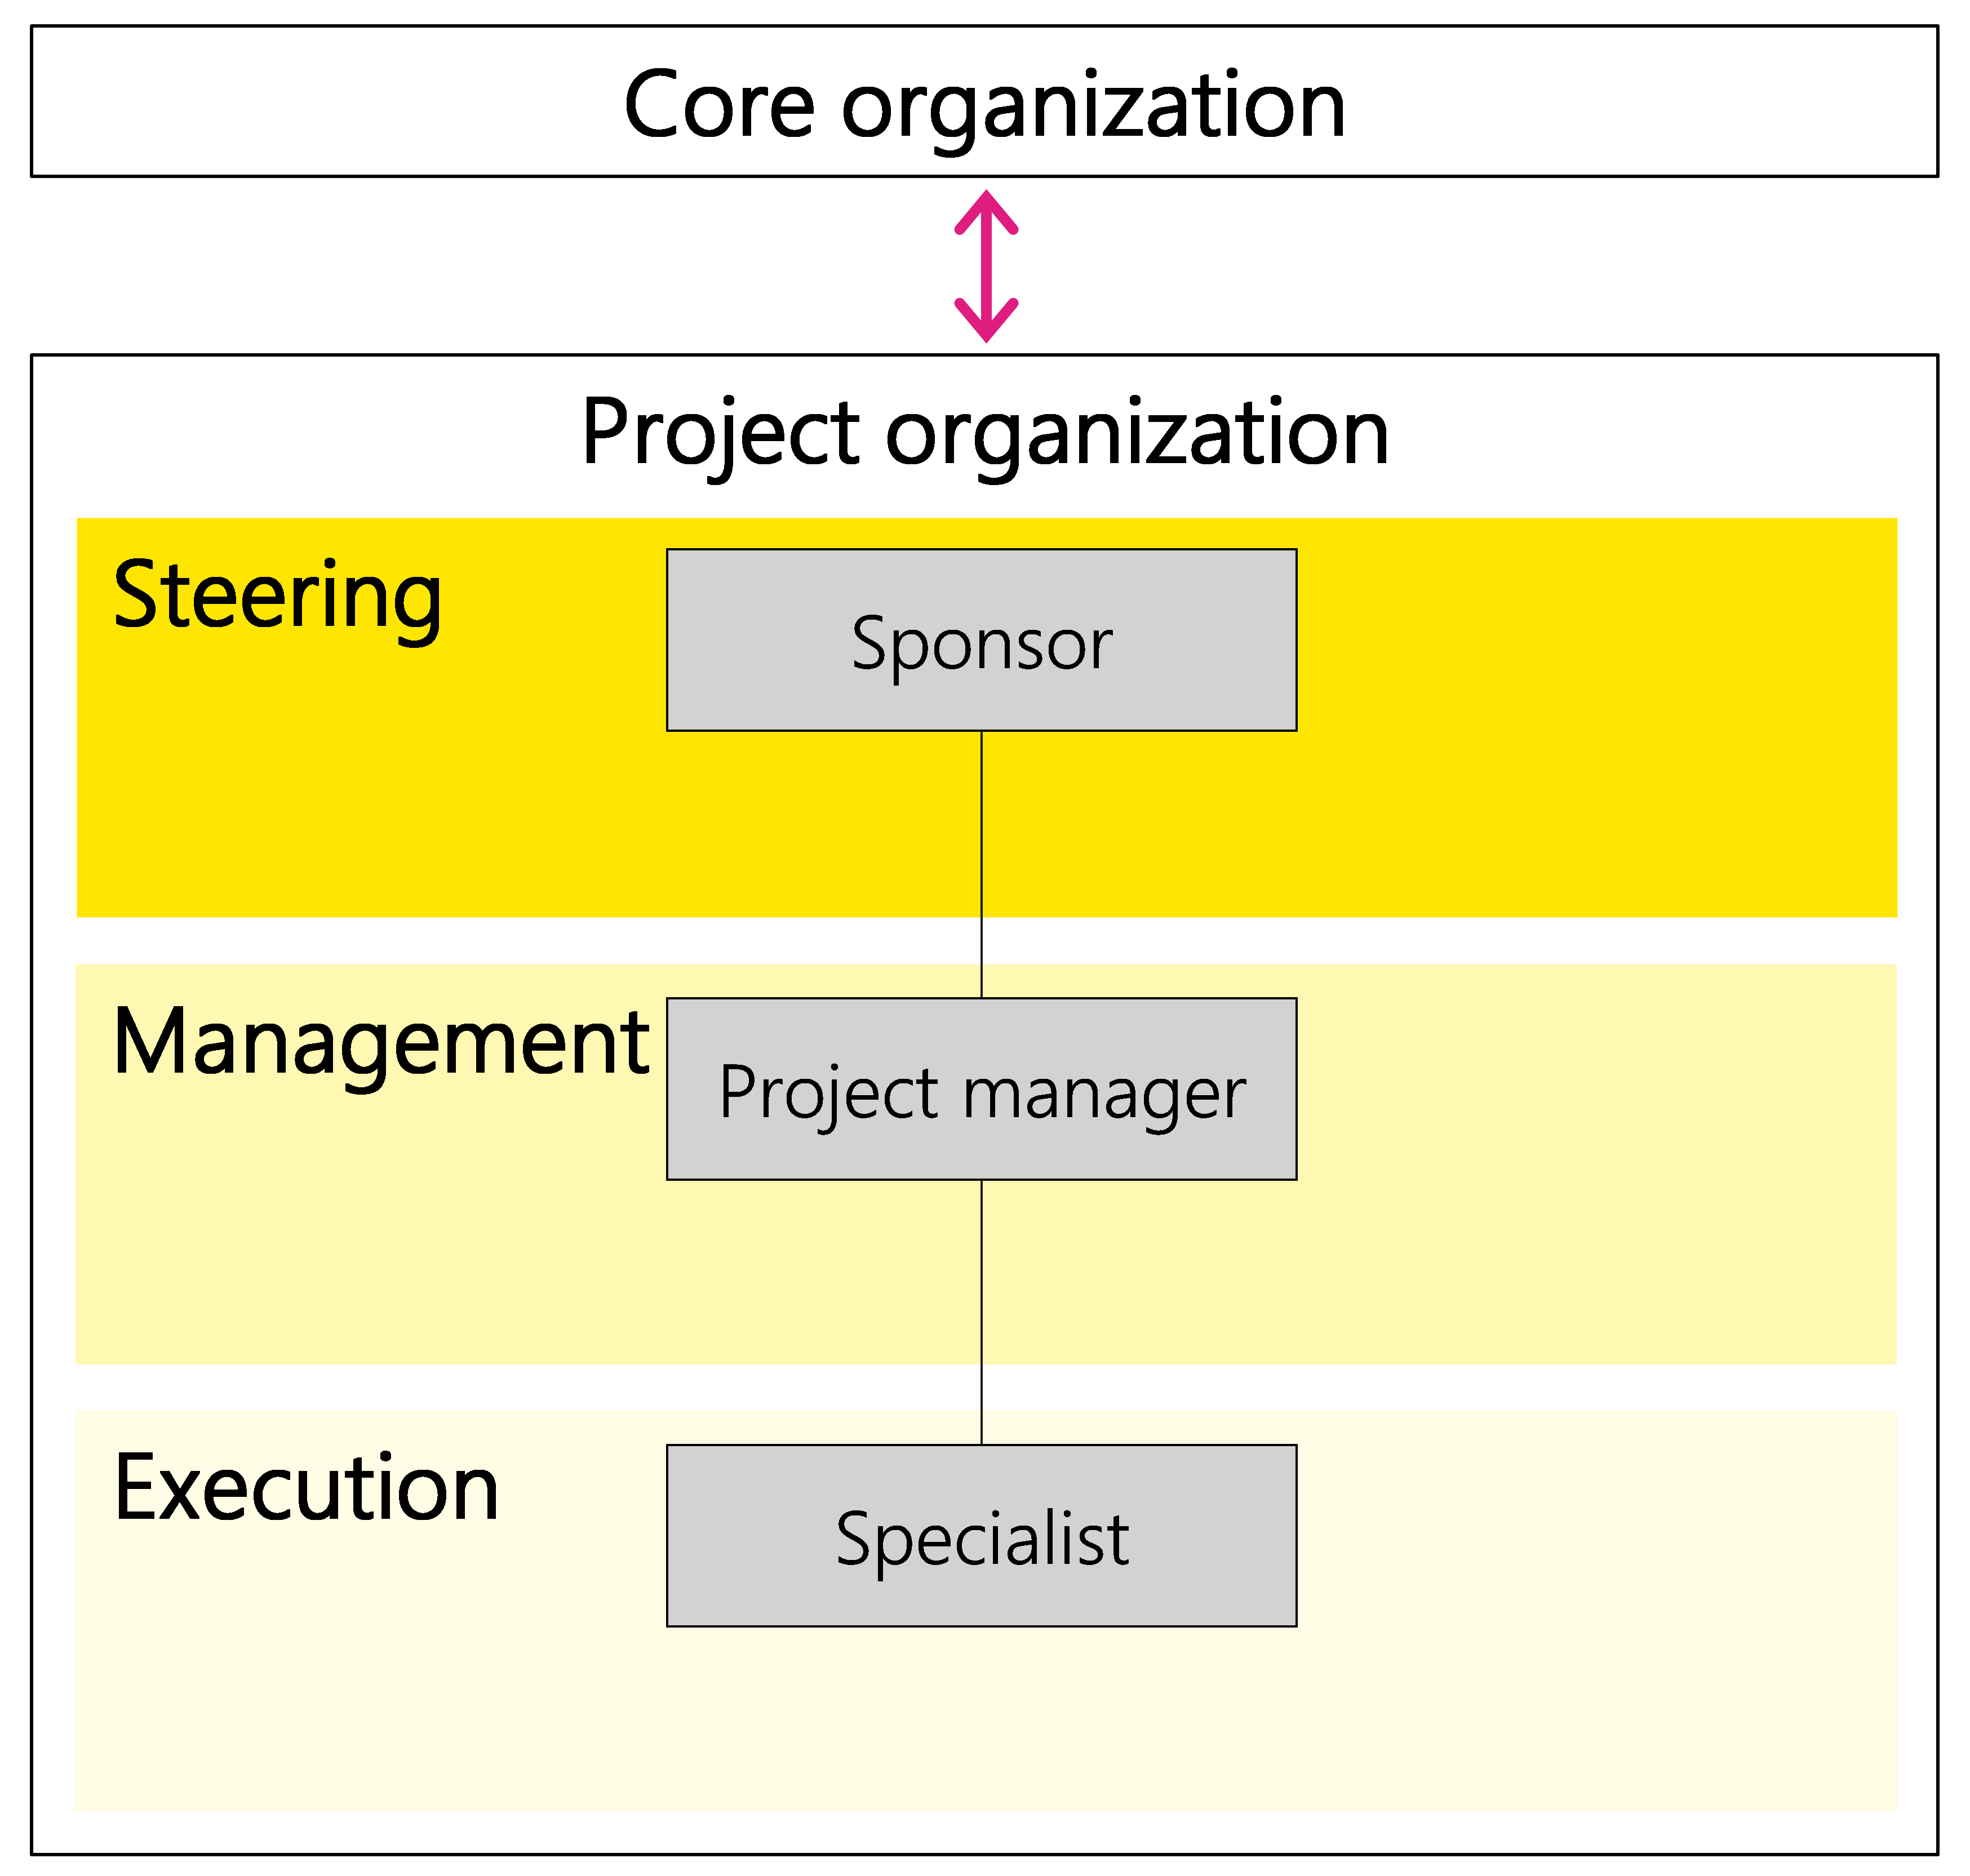 Figure 4: Relationship between the core and project organization